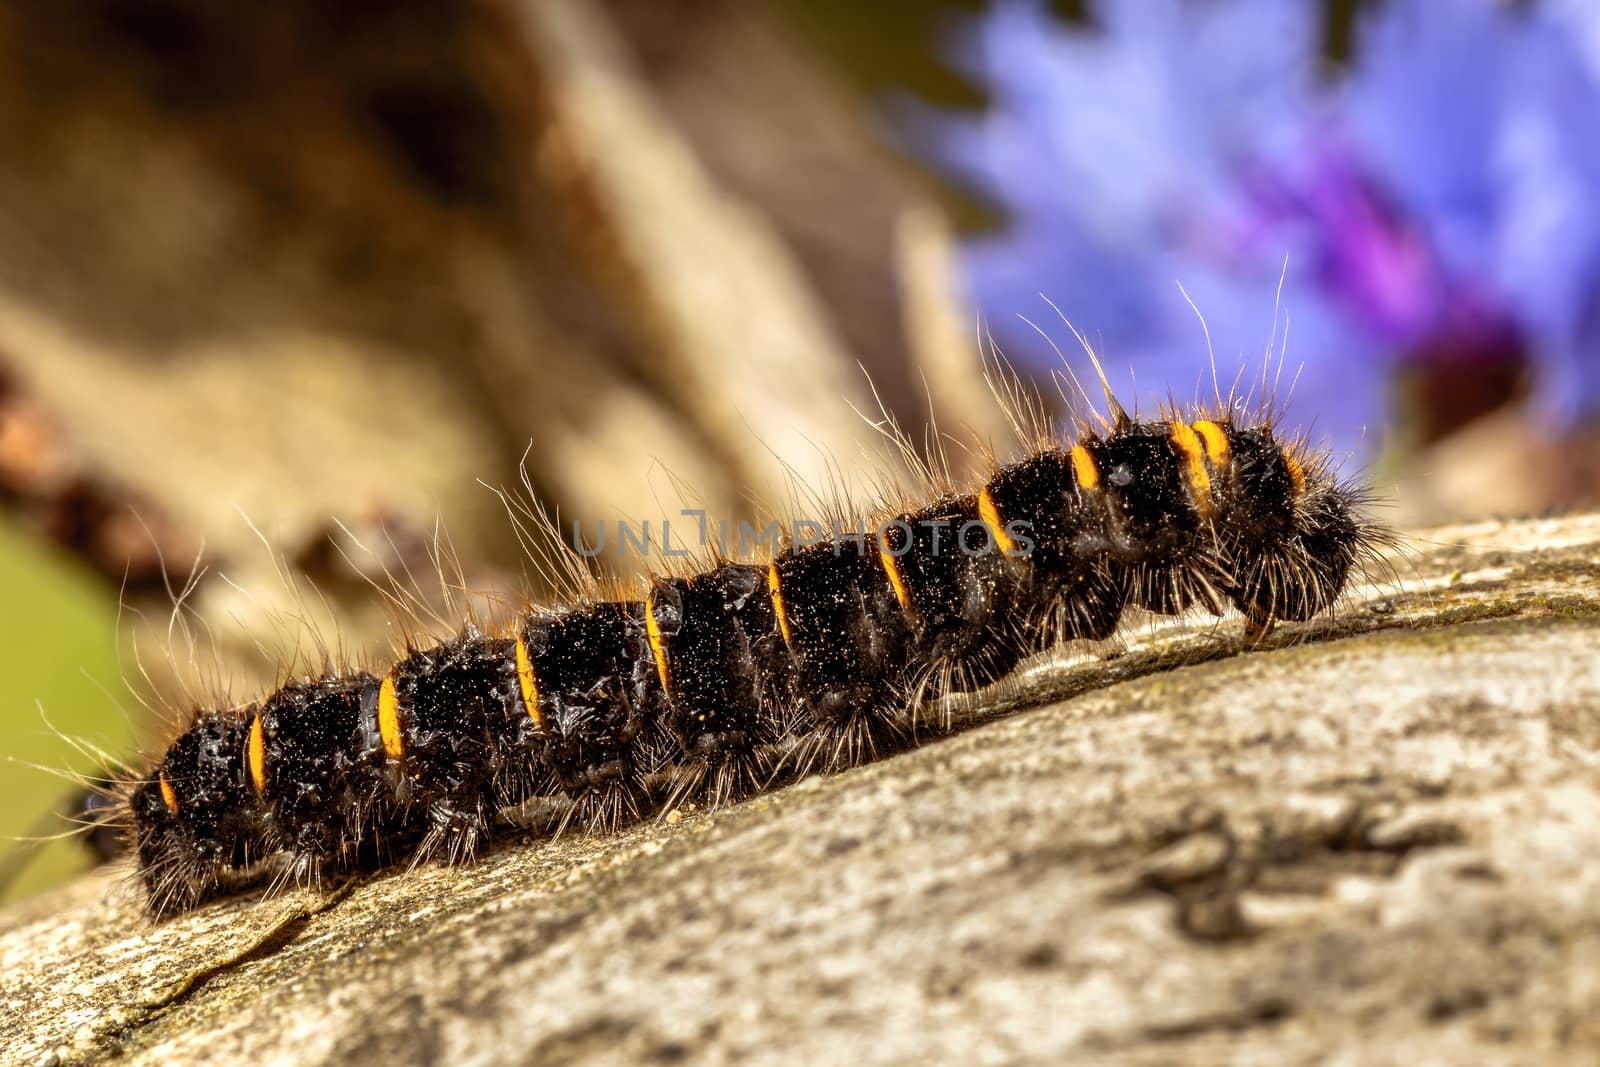 Caterpillar on a piece of wood. by 84kamila